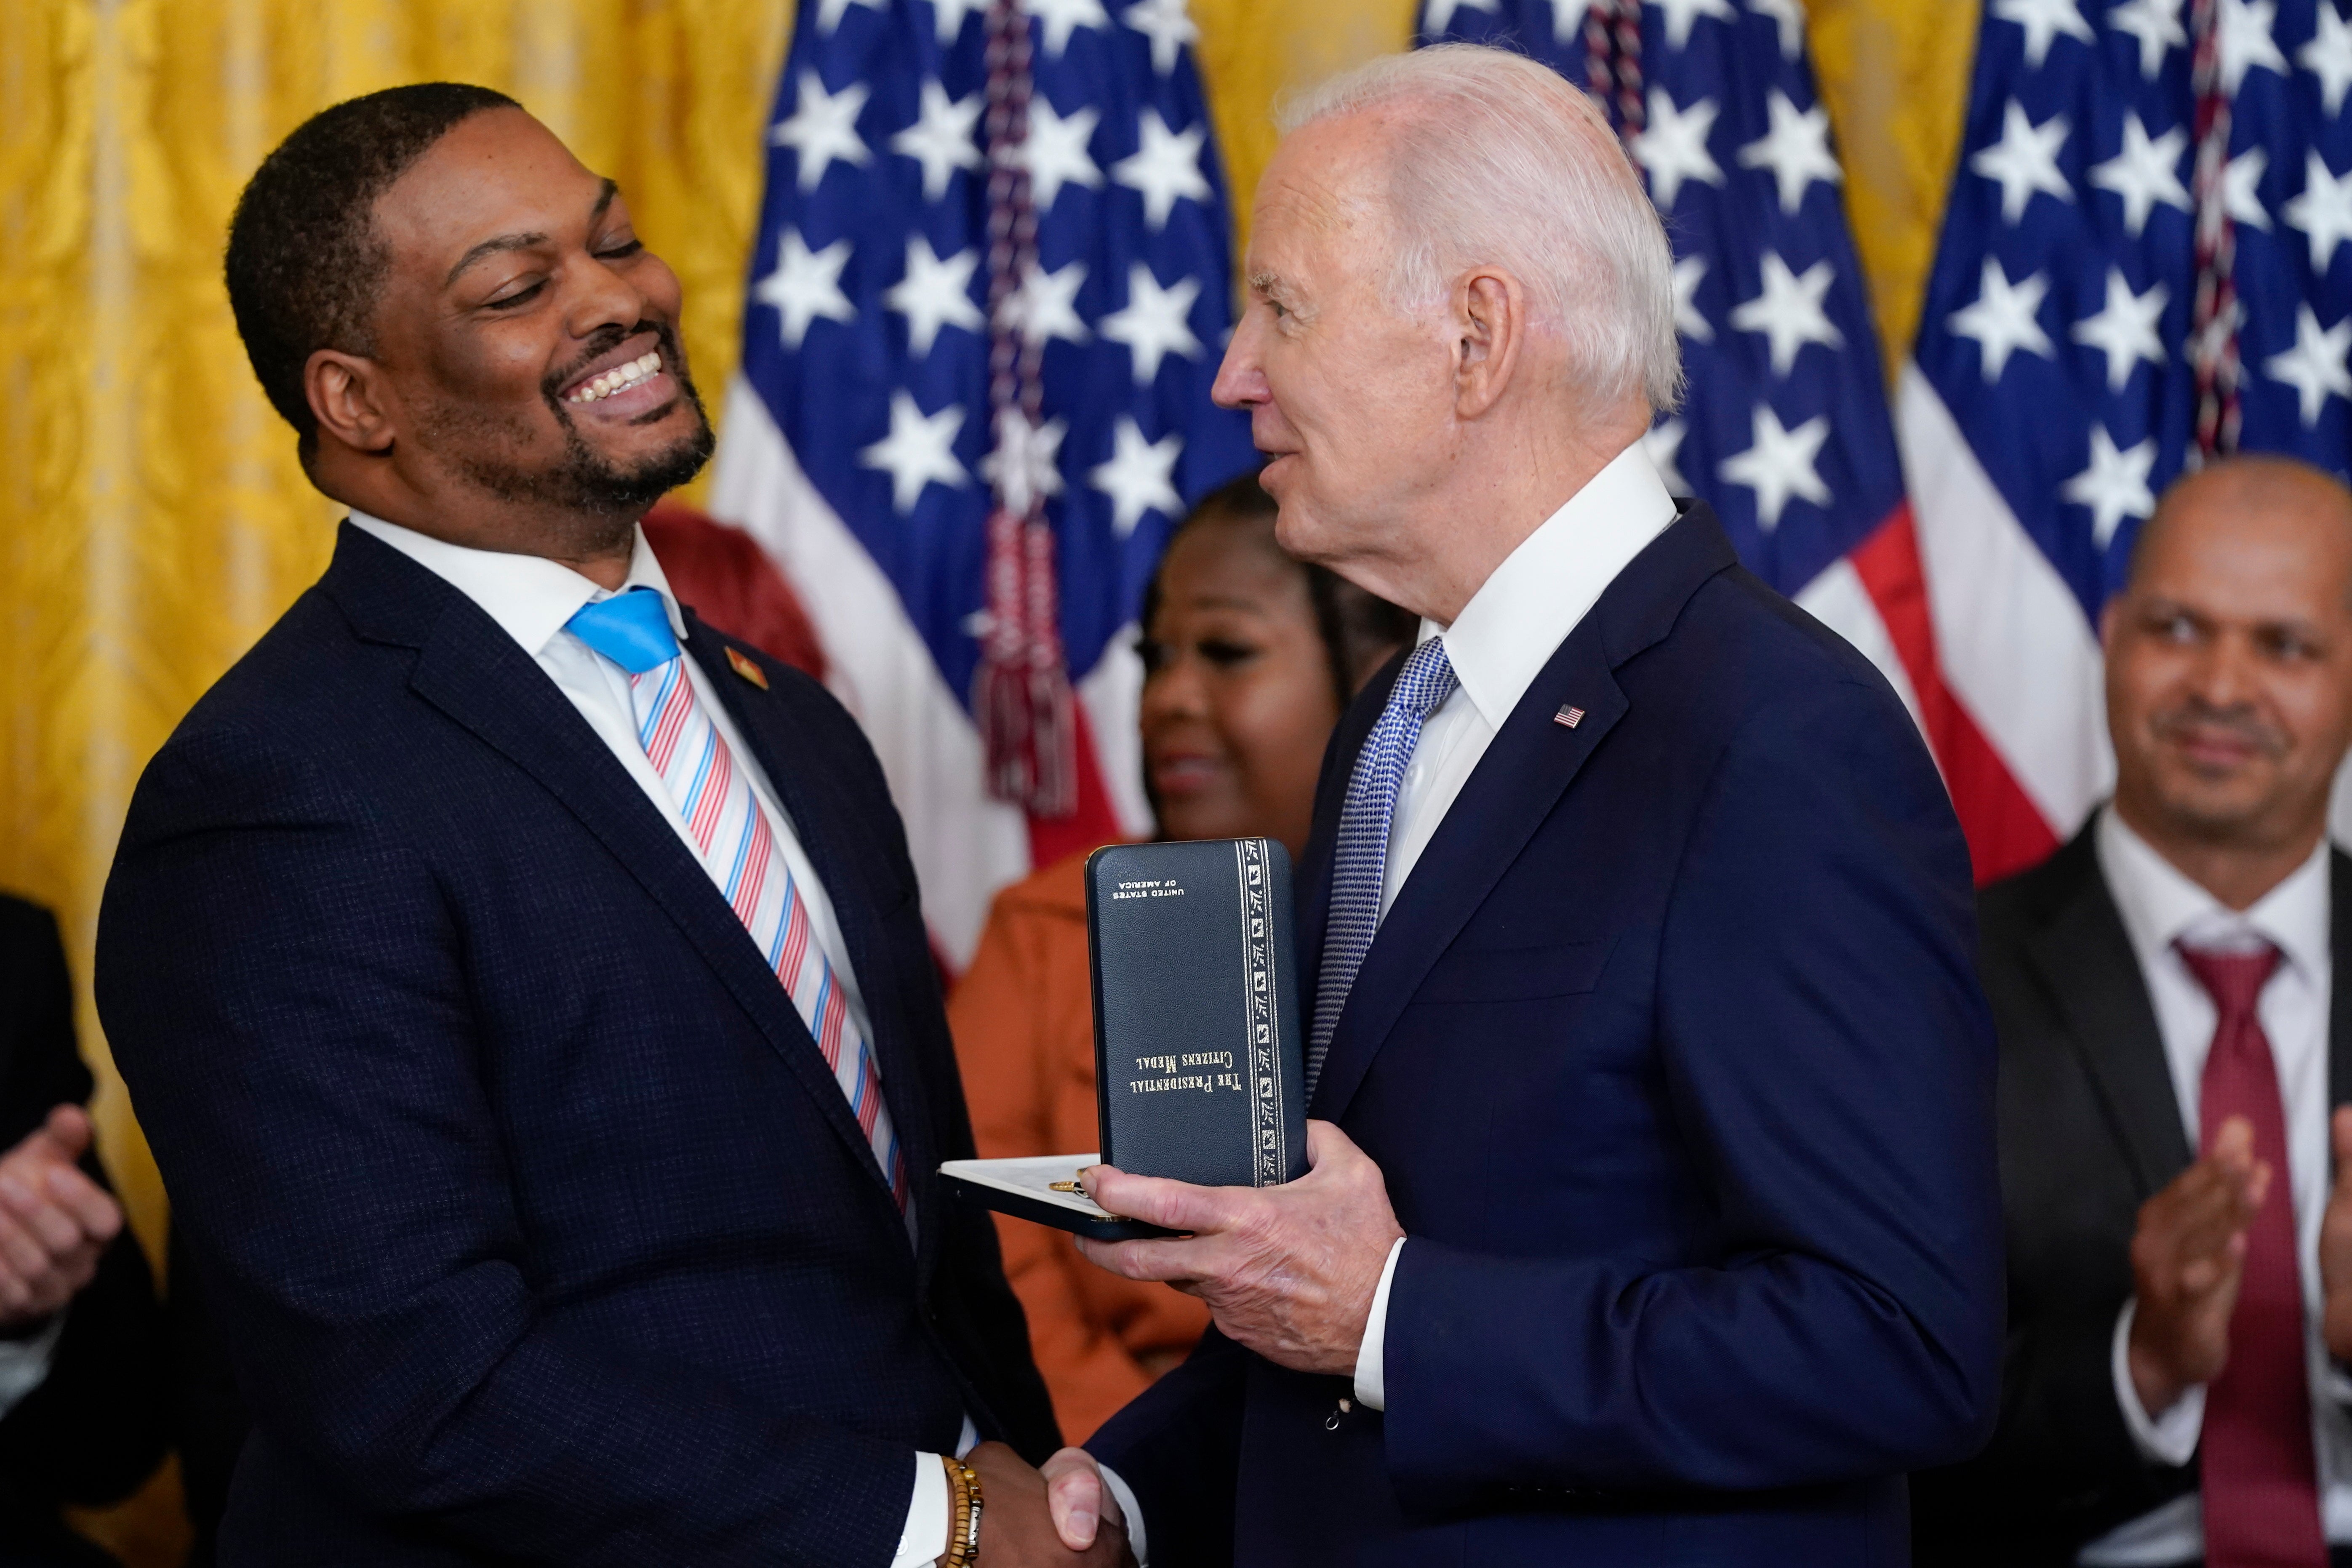 President Joe Biden awarded US Capitol Police officer Eugene Goodman the Presidential Citizens Medal on the second anniversary of the January 6 attack for his actions leading a mob away from the Senate.